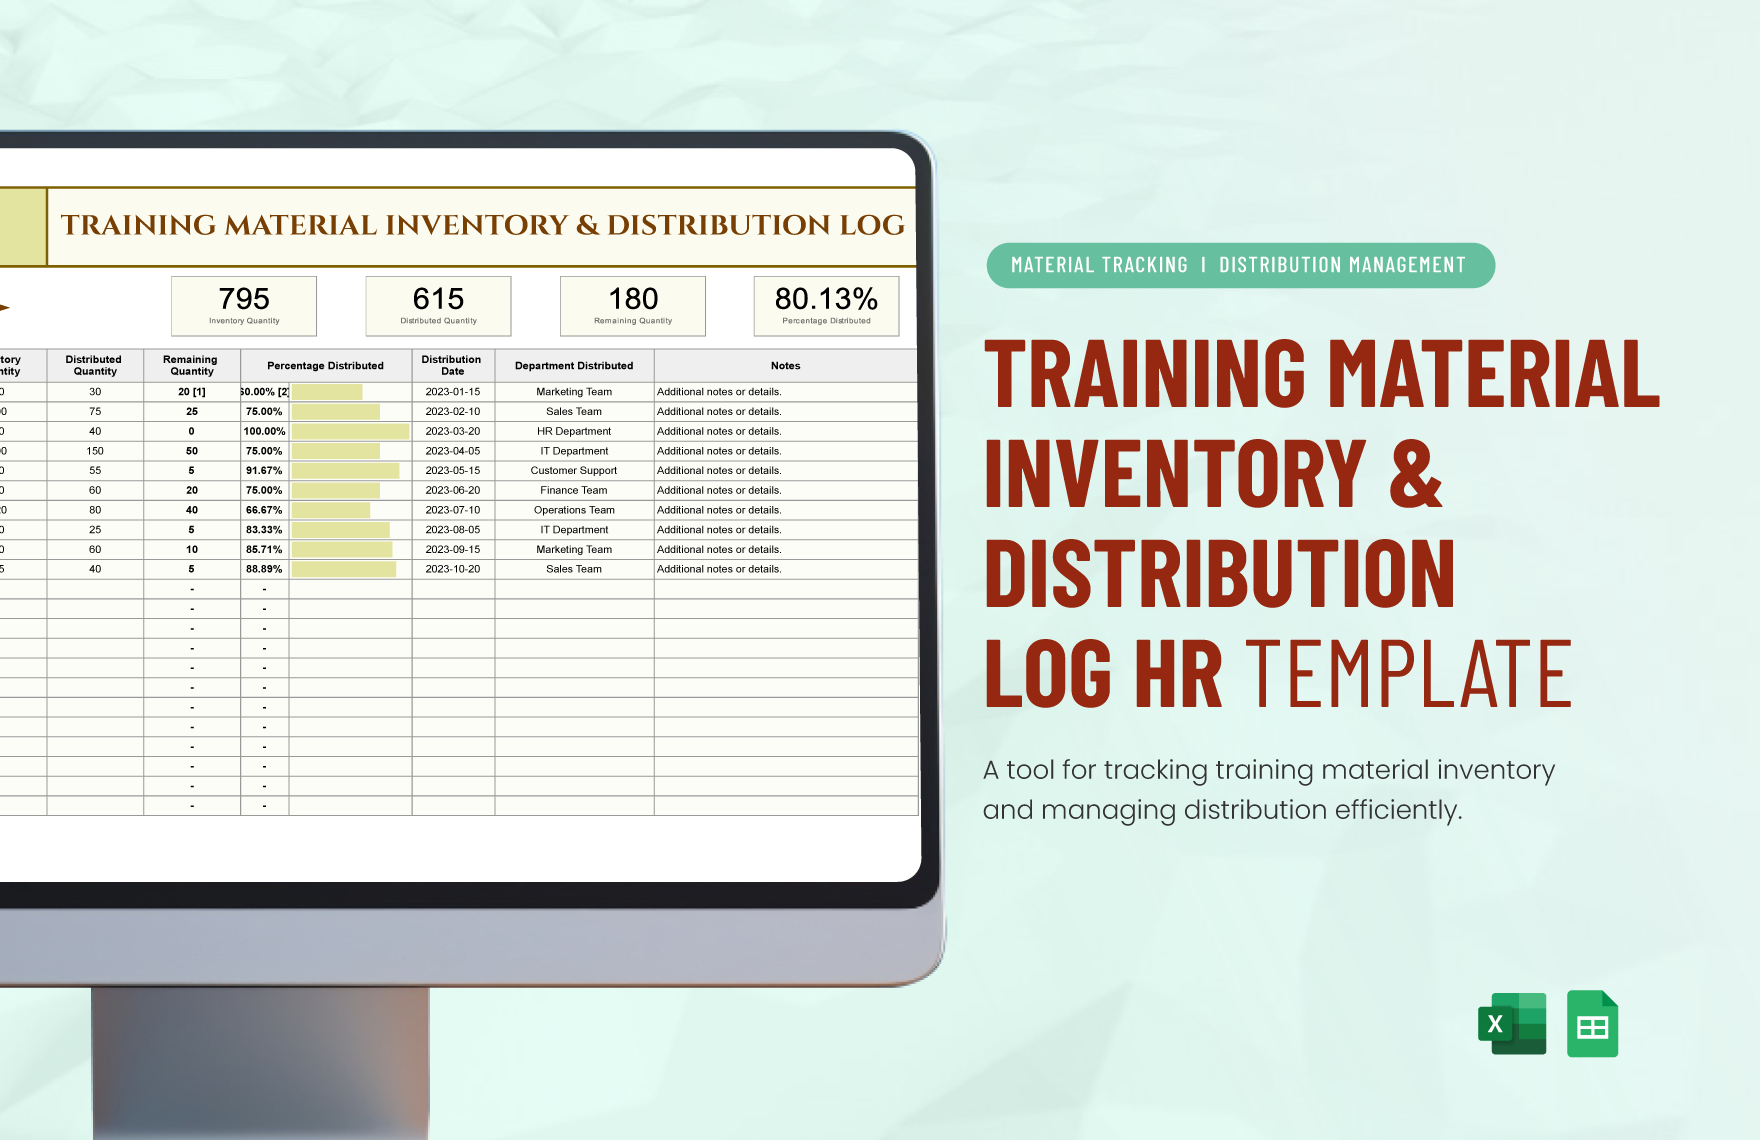 Training Material Inventory & Distribution Log HR Template